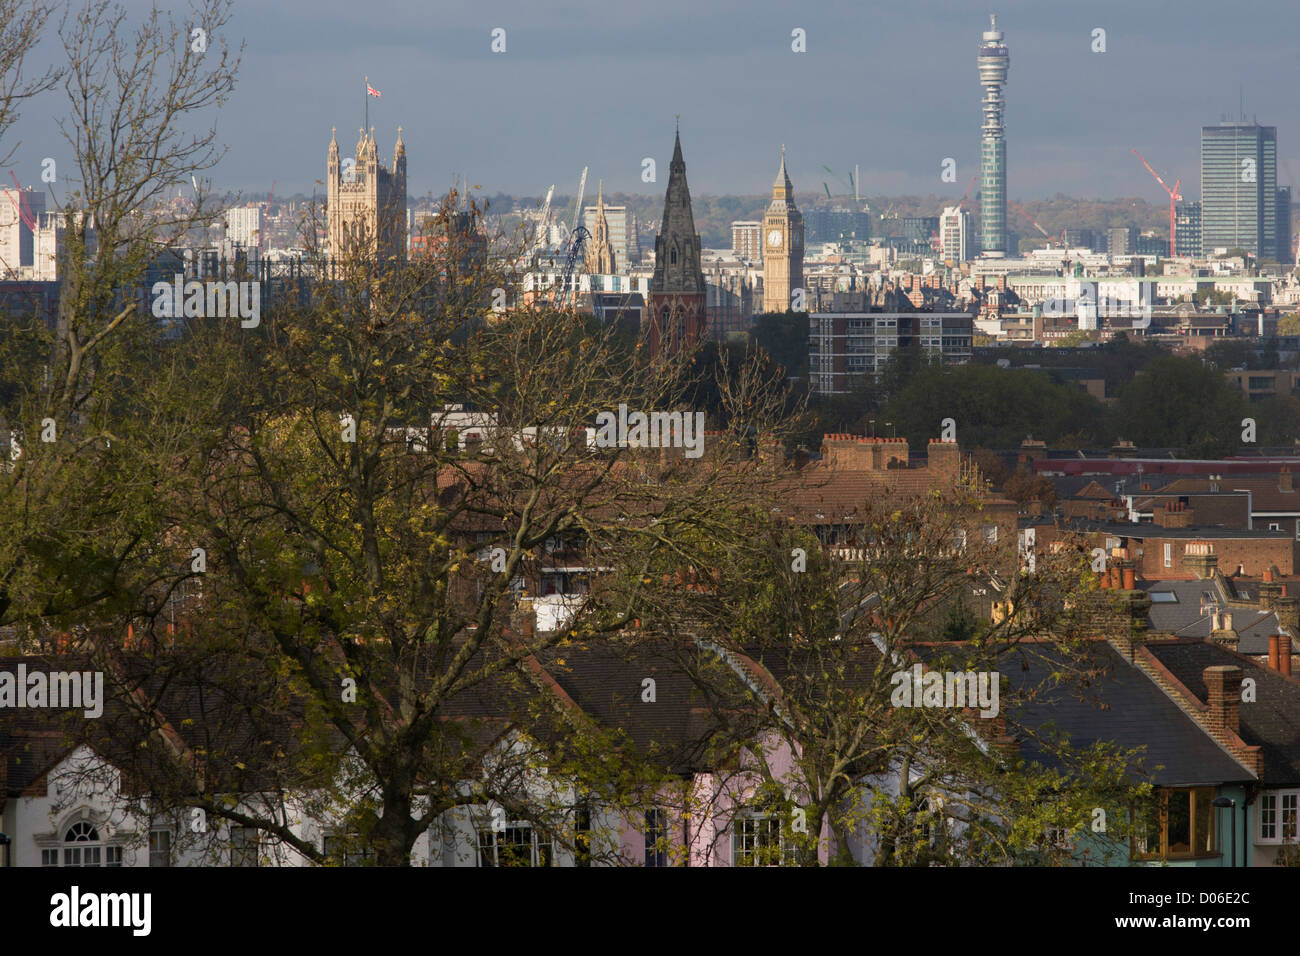 100 year-old ash trees seen overlooking south London towards Westminster and the Houses of Parliament. Stretching into the distance, as we look northwards are the tall towers of the Palace of Westminster and Queen Elizabeth Towert (Big Ben) - the seats of power and government of the United Kingdom. It is autumn and leaves are falling from the ash trees in the foreground that a century old but now in jeopardy from ash dieback disease (Chalara fraxinea) which is currently claiming the lives of Britain's young and old ash trees. Stock Photo